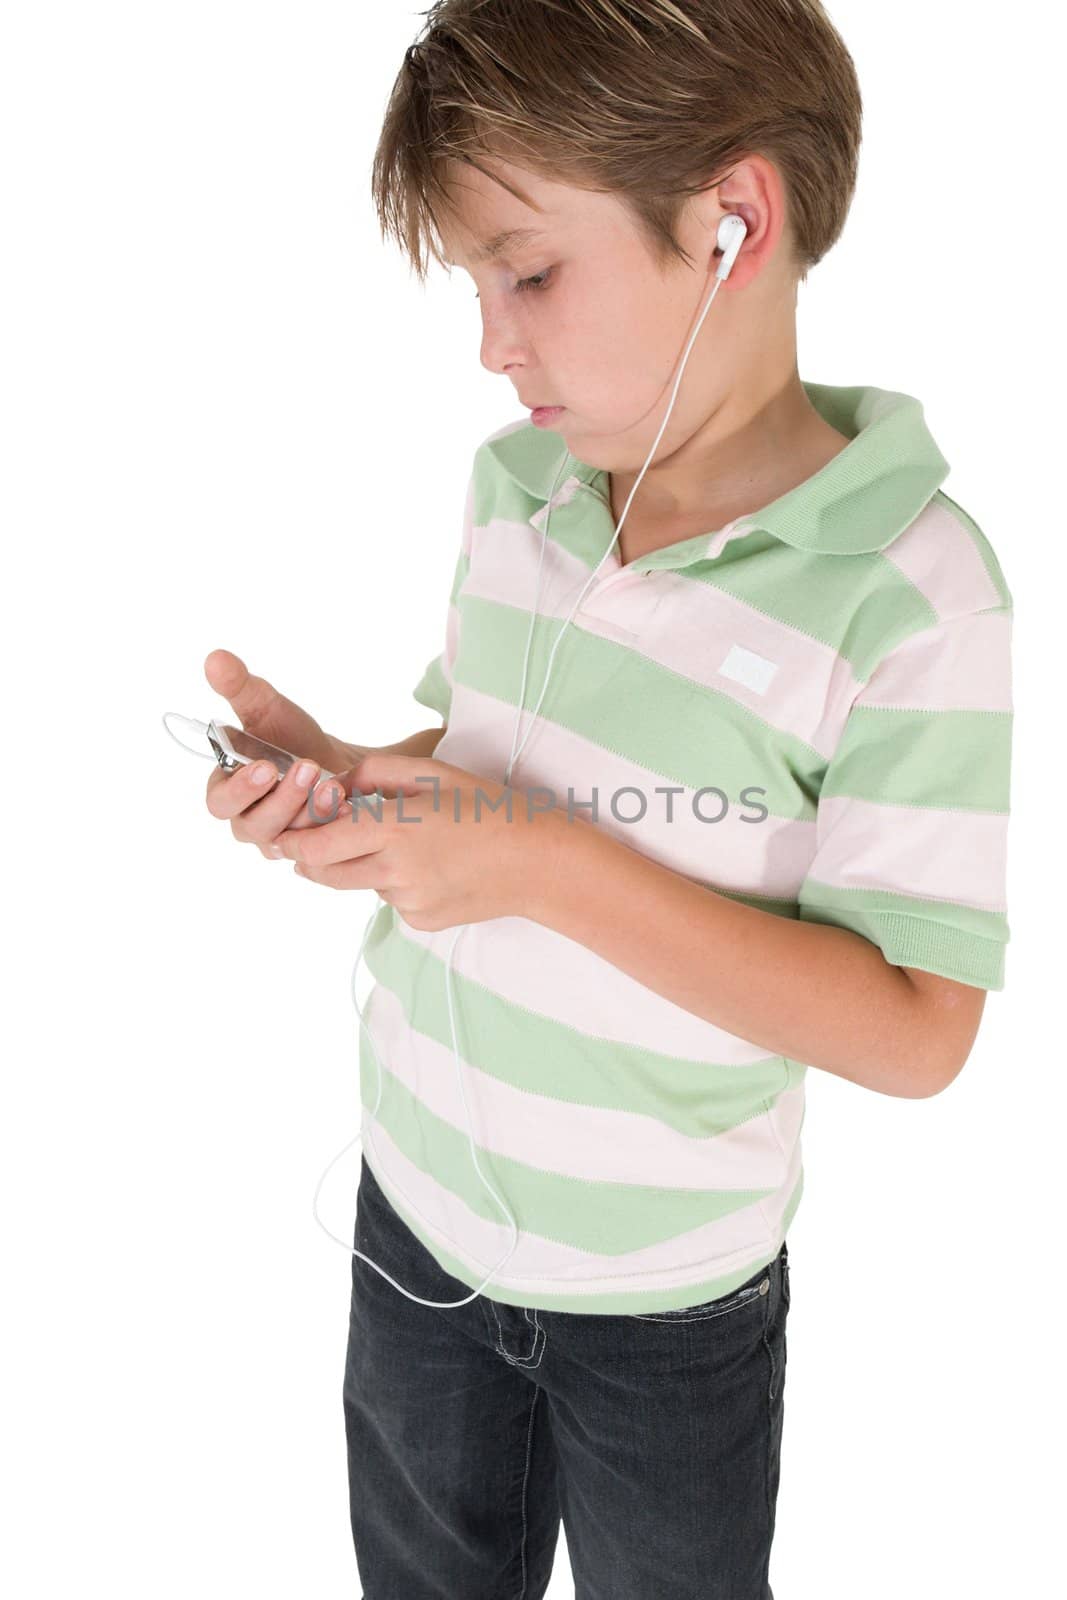 Child using an mp3 music player by lovleah